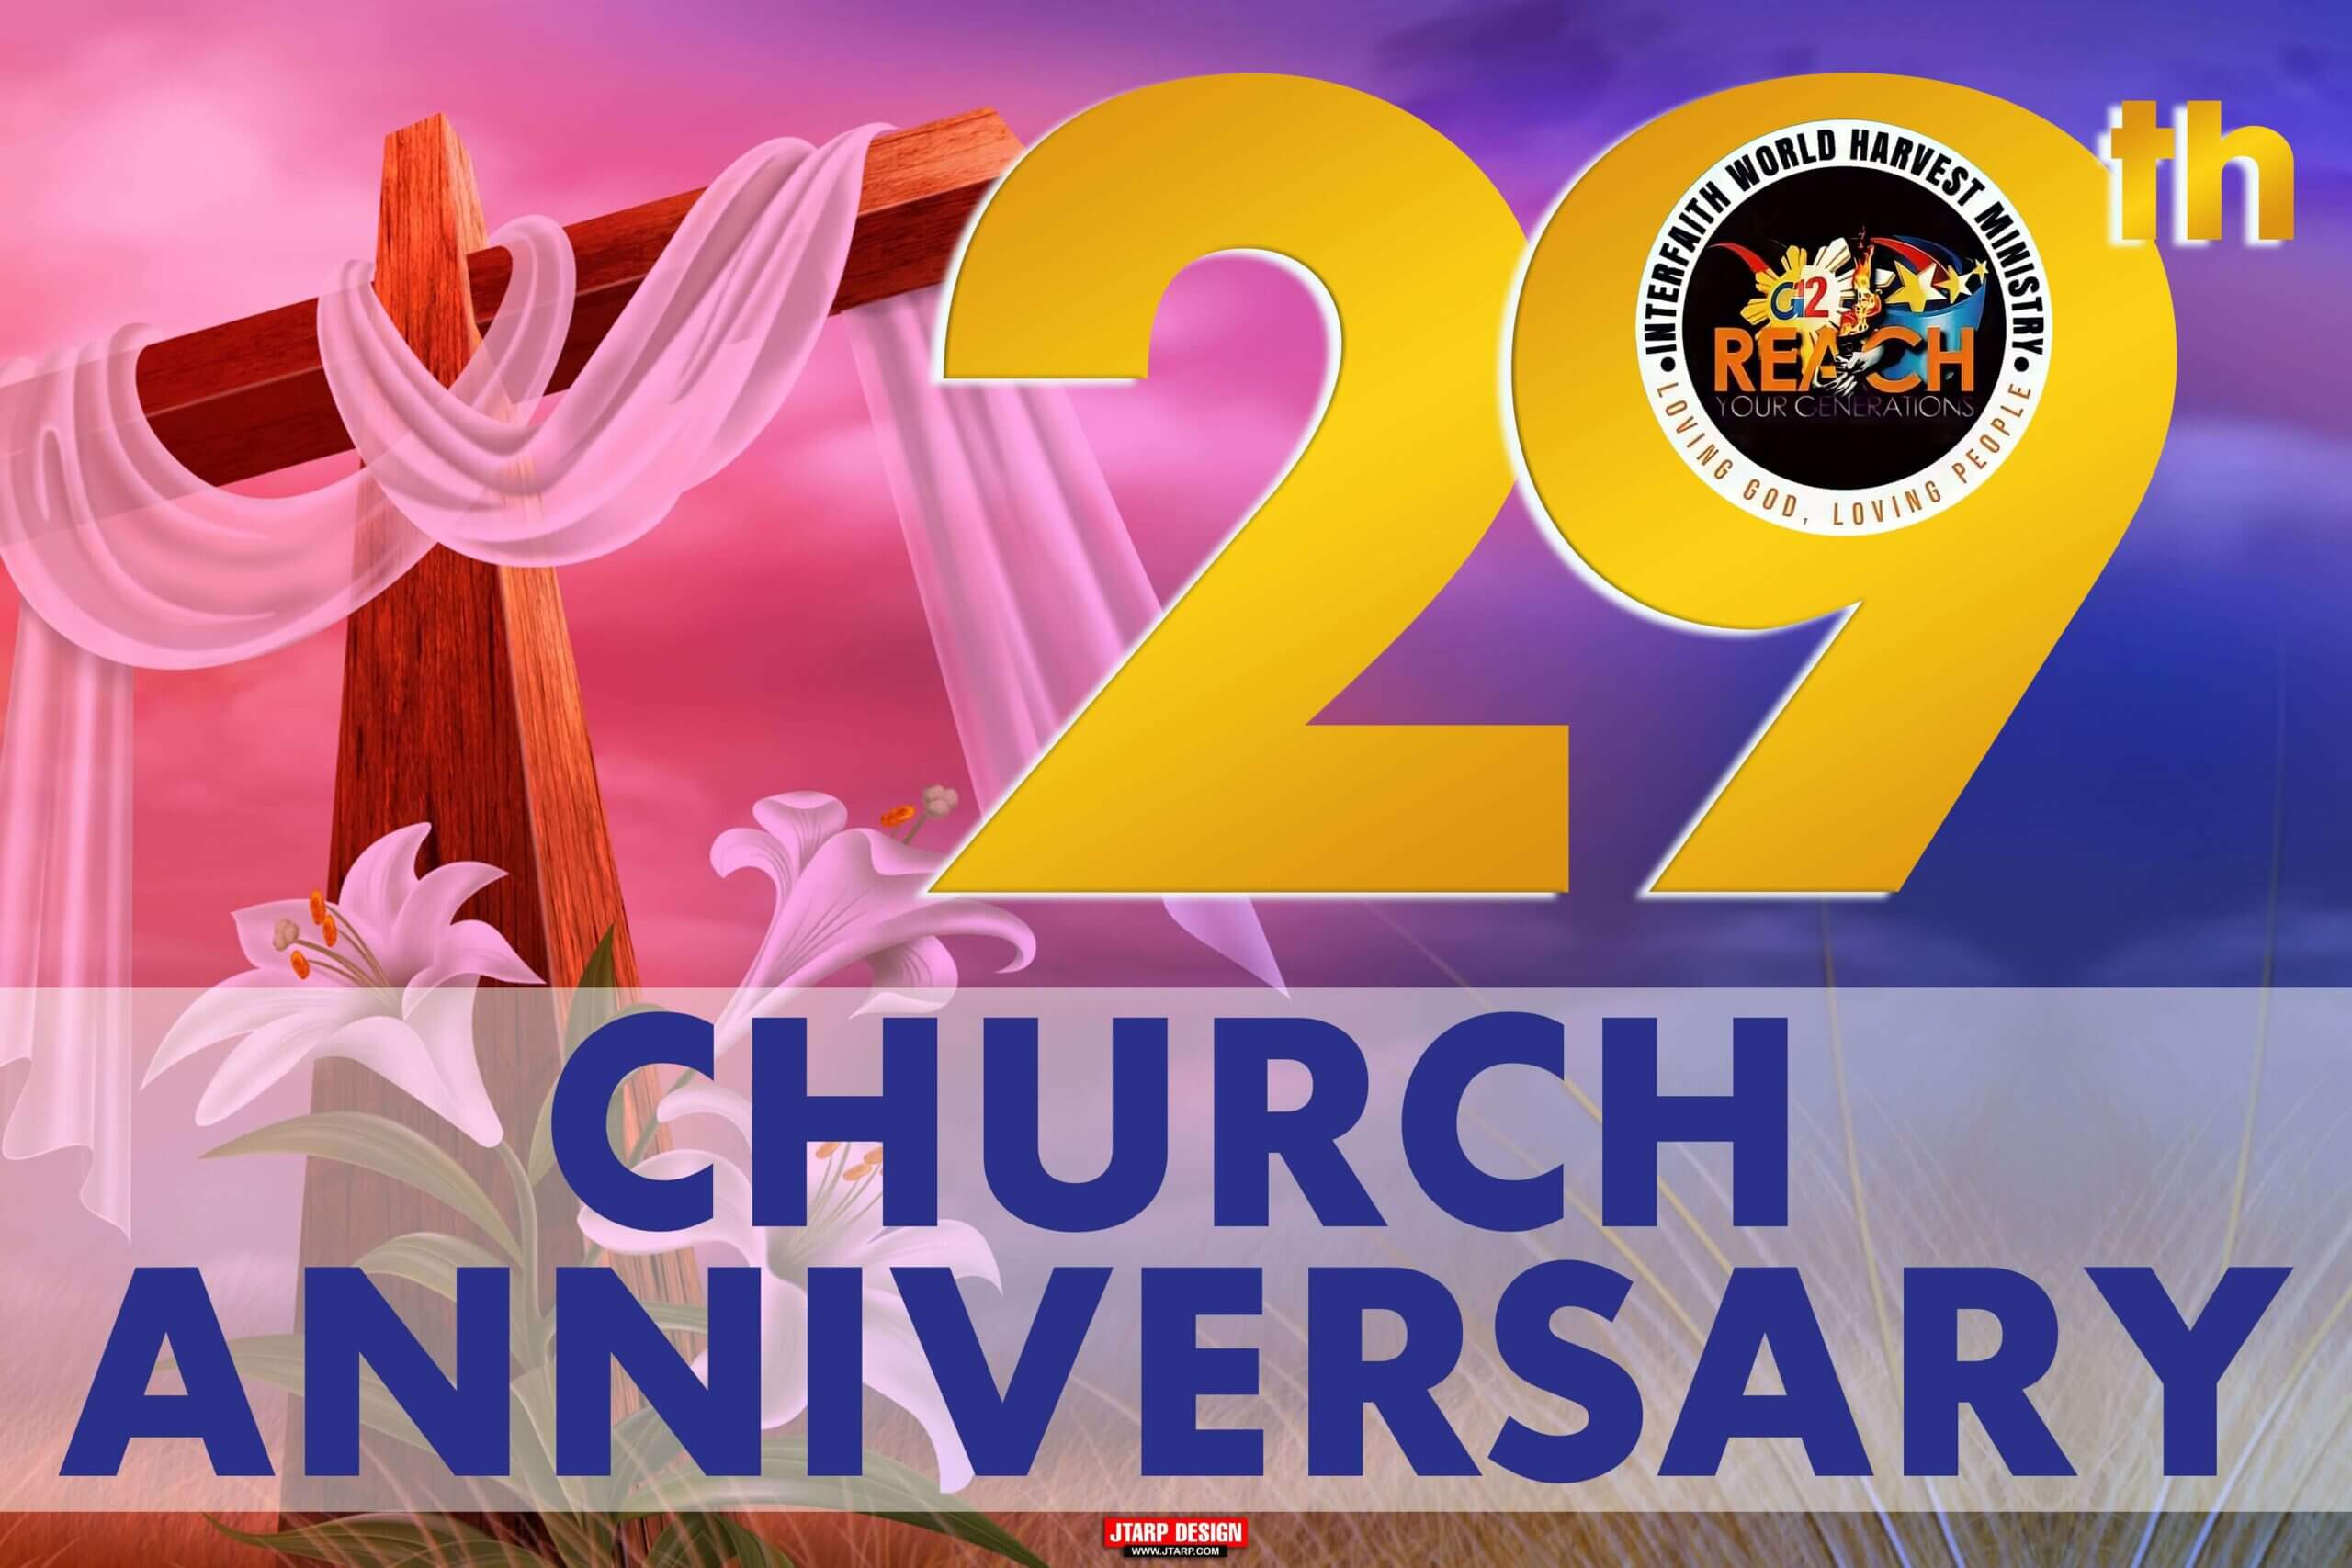 29th Church Anniversary - Events Layout